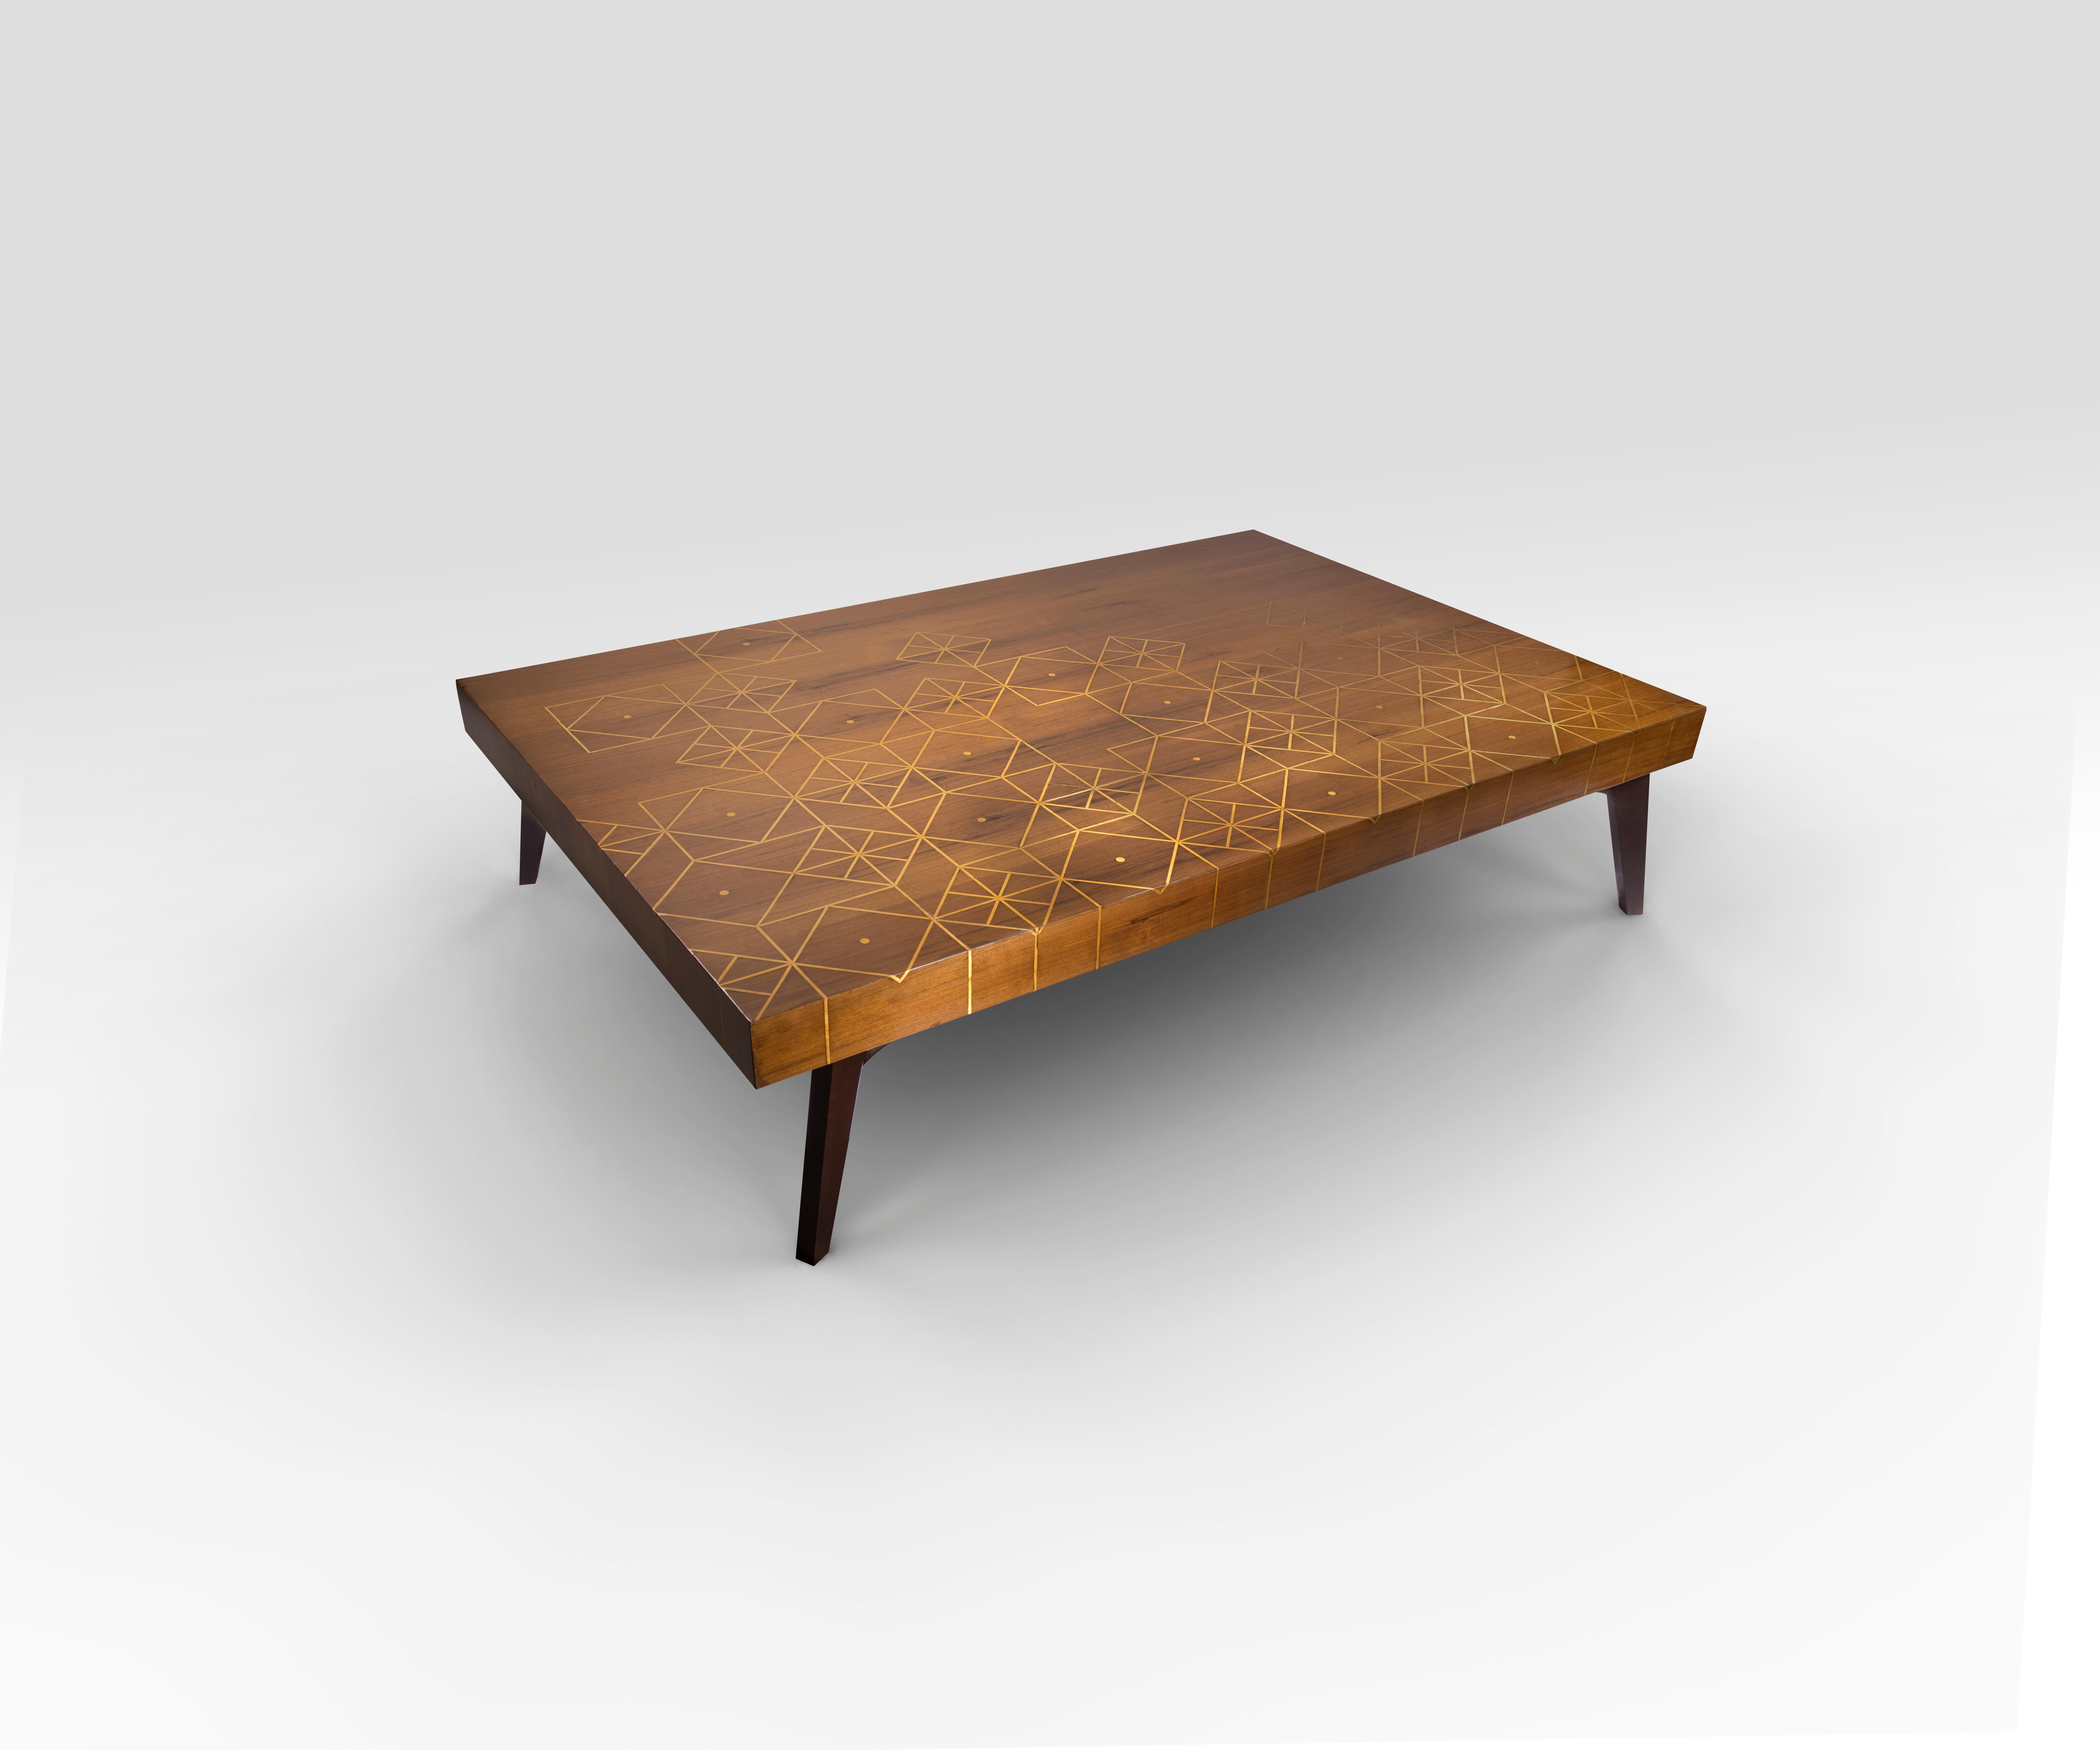 Walnut Coffee Table with Handcrafted Brass Inlay Inspired from a Nubian Motif. 
Our Wonder coffee table is more than just a handcrafted furniture showpiece! The exquisite piece is made from massive walnut wood and inlayed with an asymmetric brass